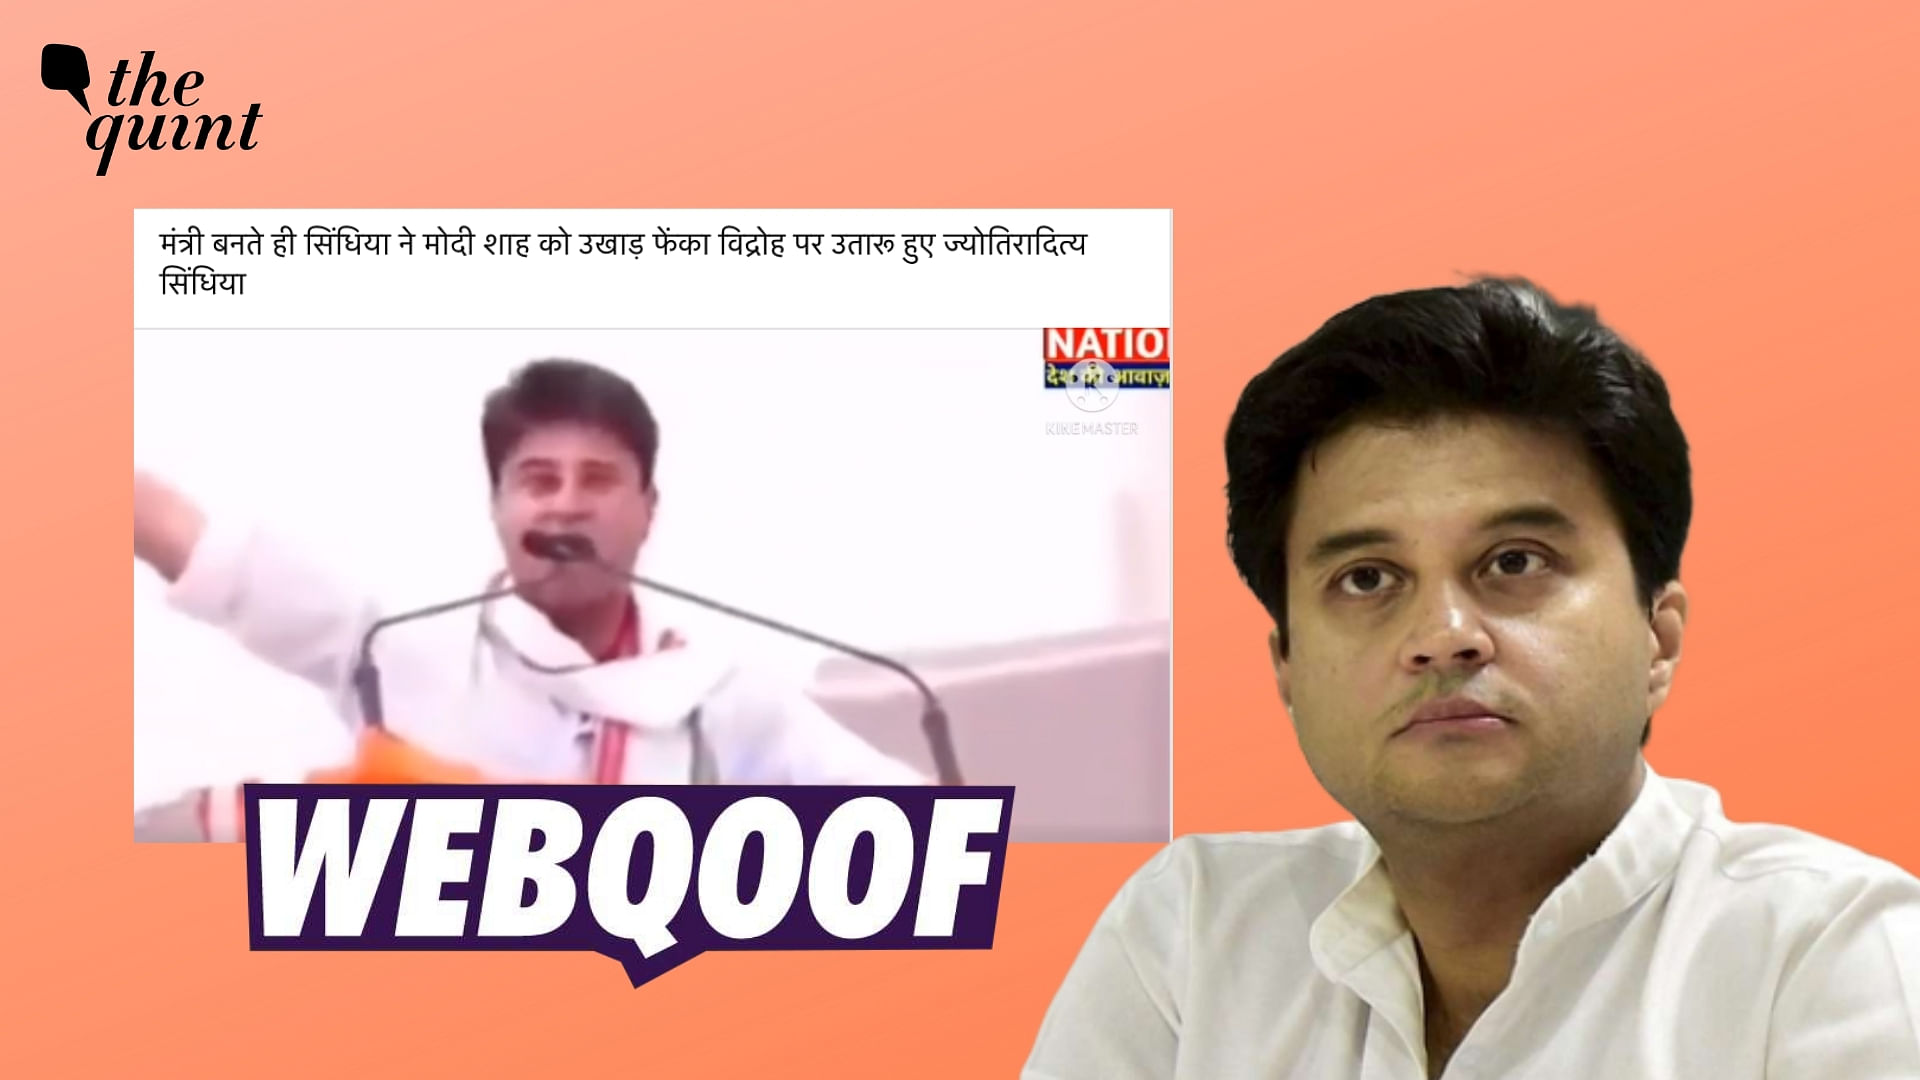 <div class="paragraphs"><p>The video claims that&nbsp;Jyotiraditya Scindia lashed out at PM Narendra Modi.&nbsp;</p></div>